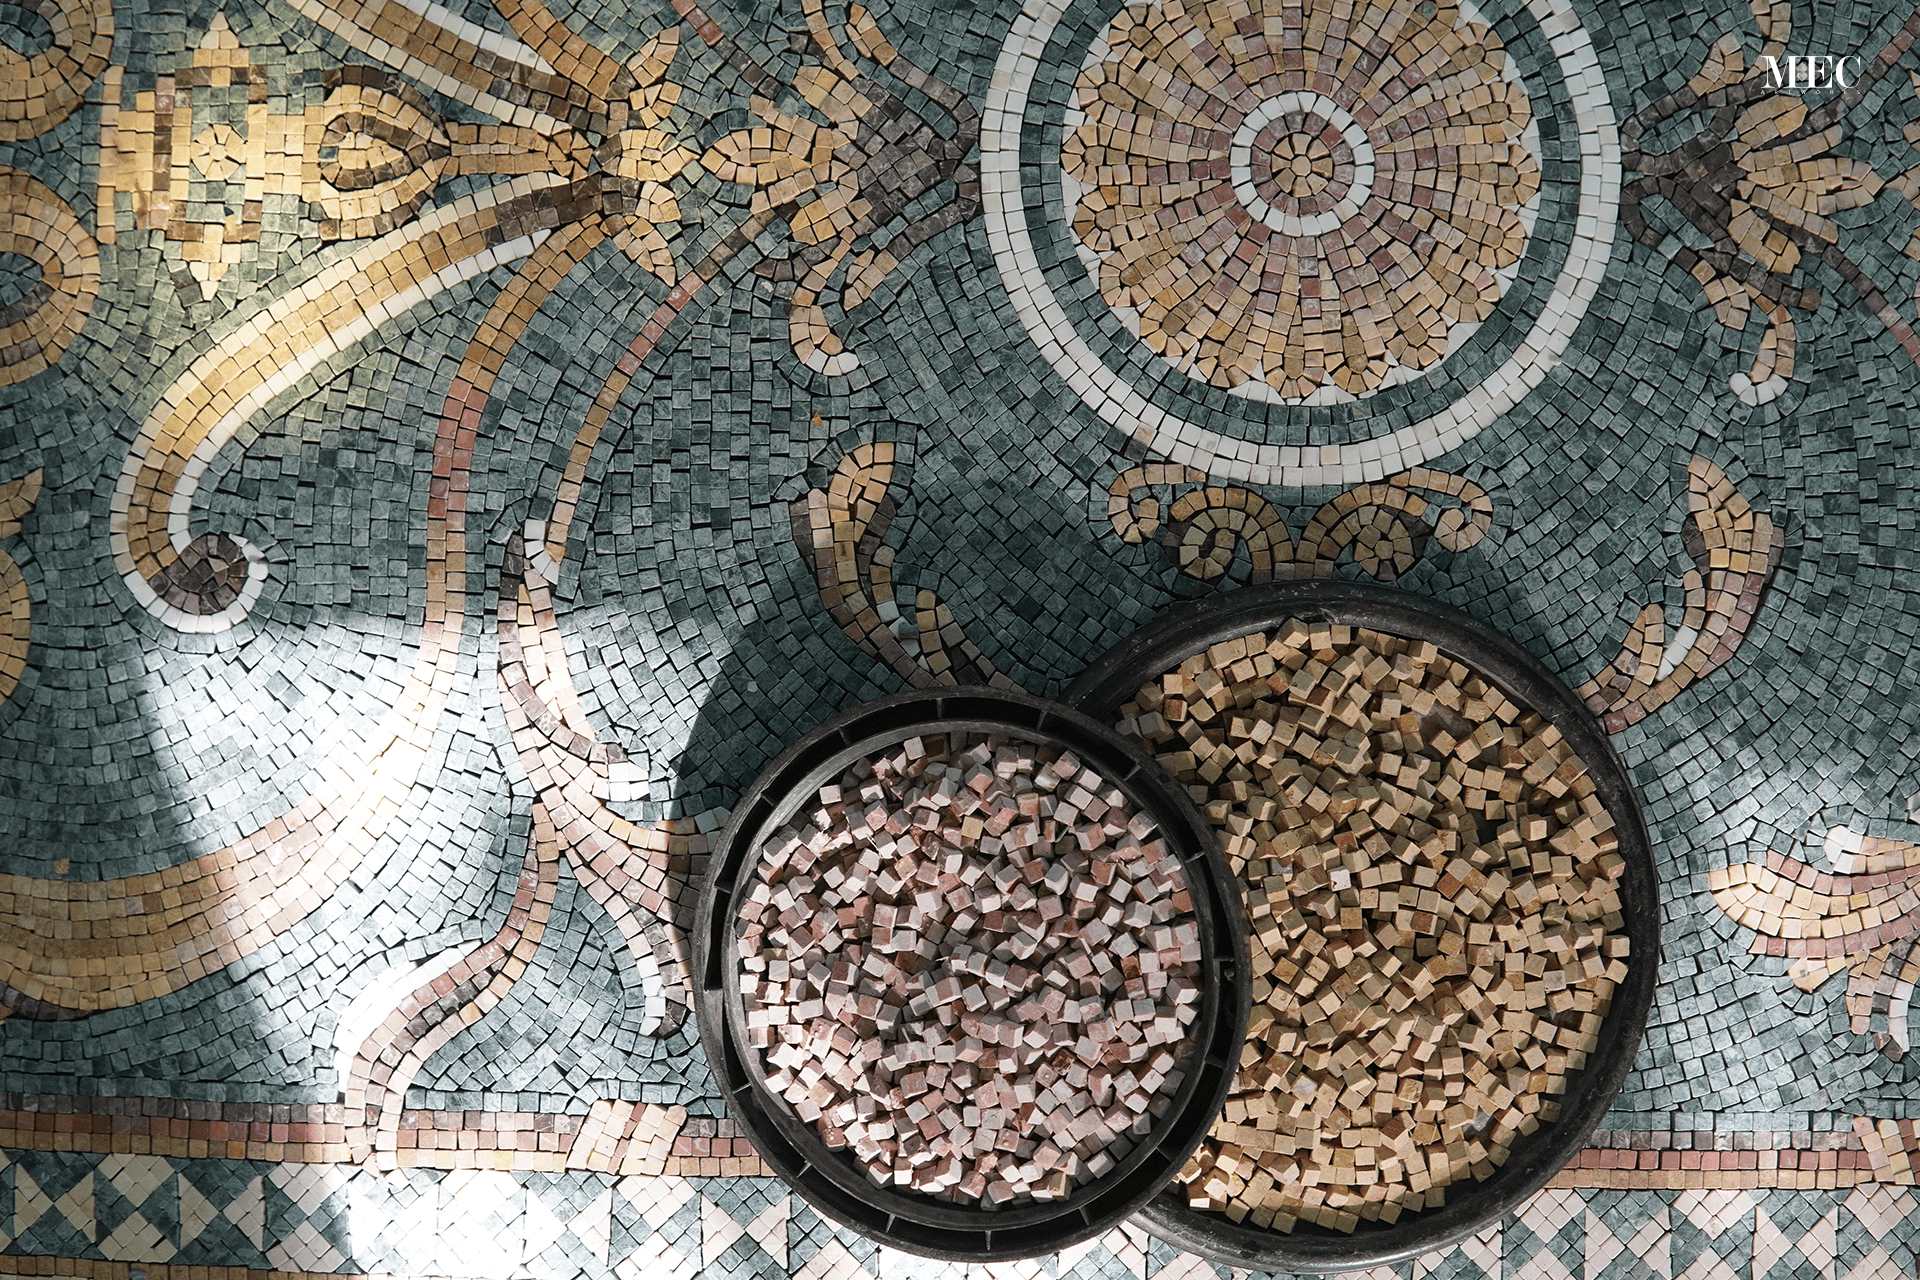 A detailed mosaic floor with two round manhole covers filled with marble mosaics.